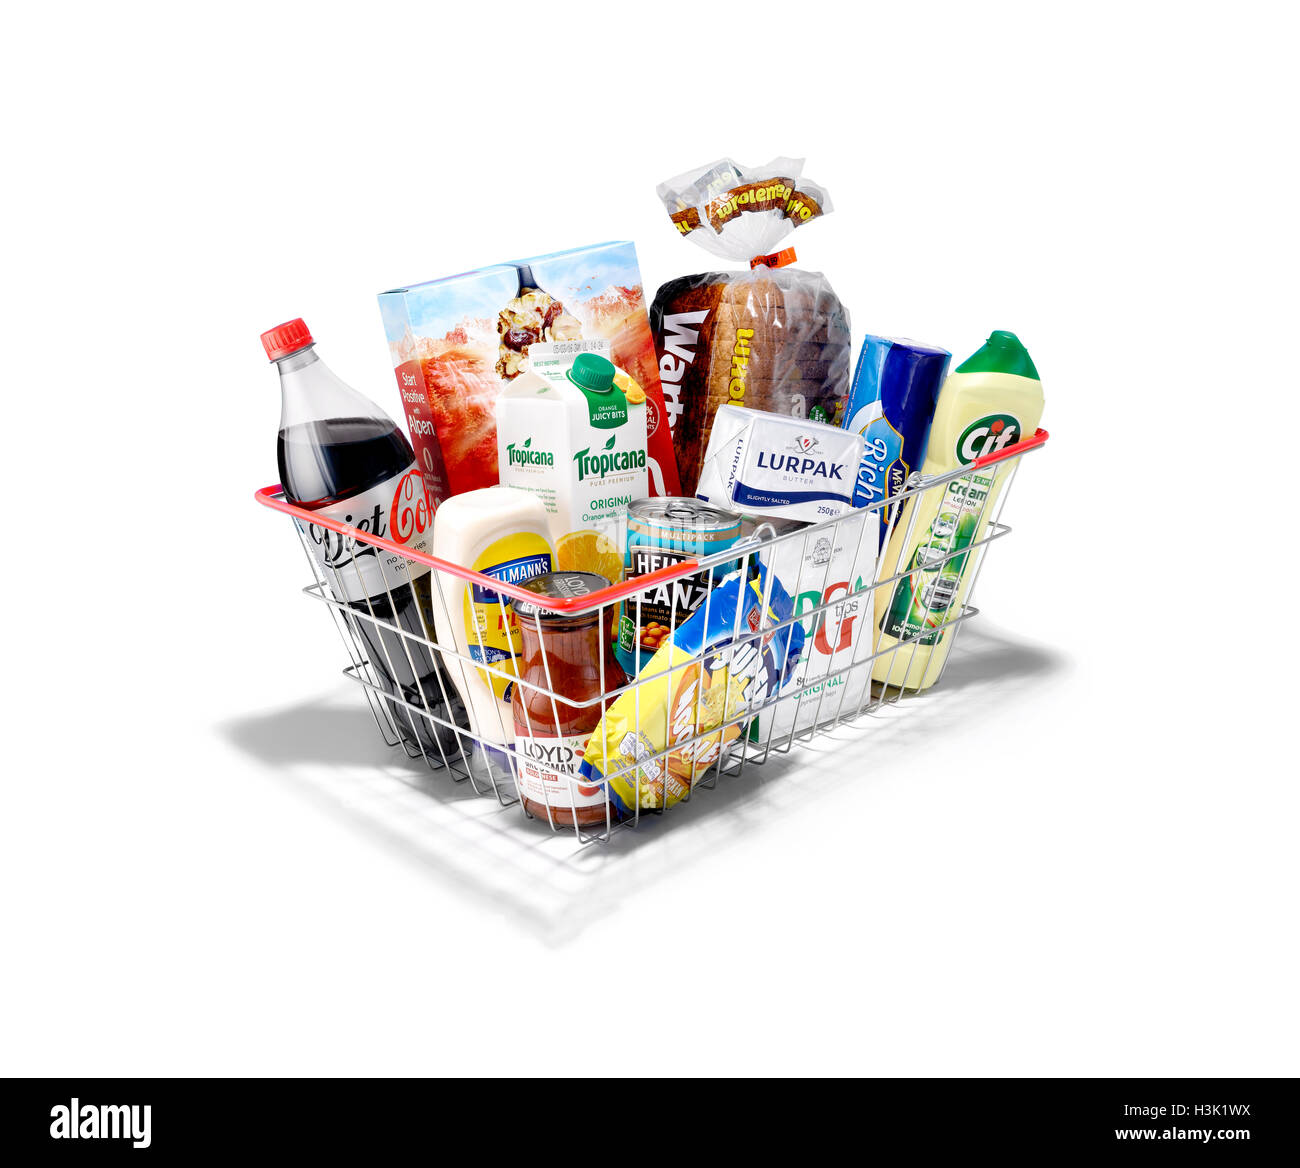 A basket of shopping Stock Photo